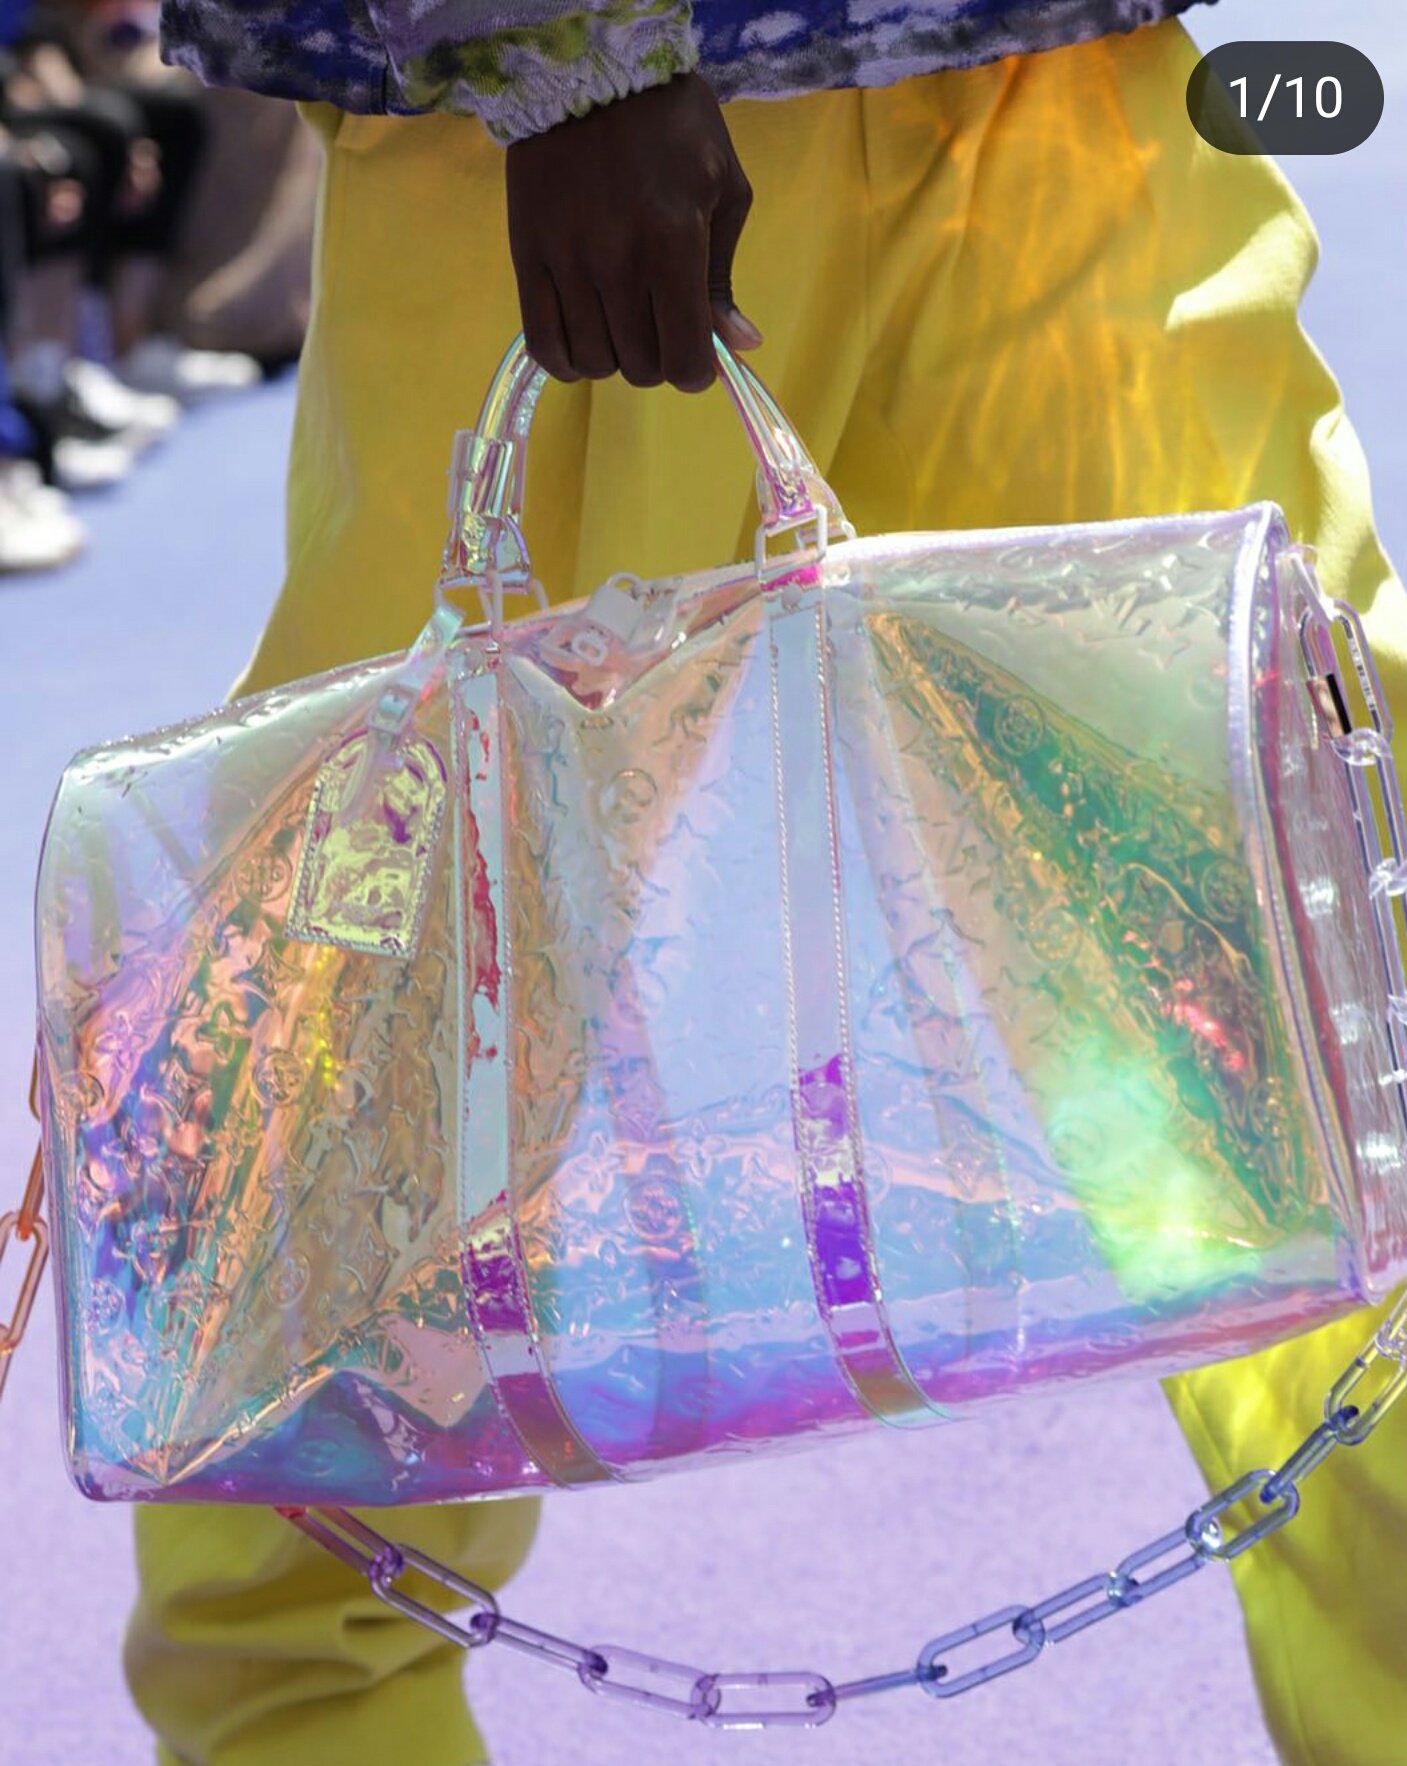 𝖓𝖔𝖎𝖗 on X: Virgil Abloh's debut collection at Louis Vuitton was an  inclusive party everyone was invited to! This was clear by the rainbow  runway at the Palais Royal! Abloh definitely delivered